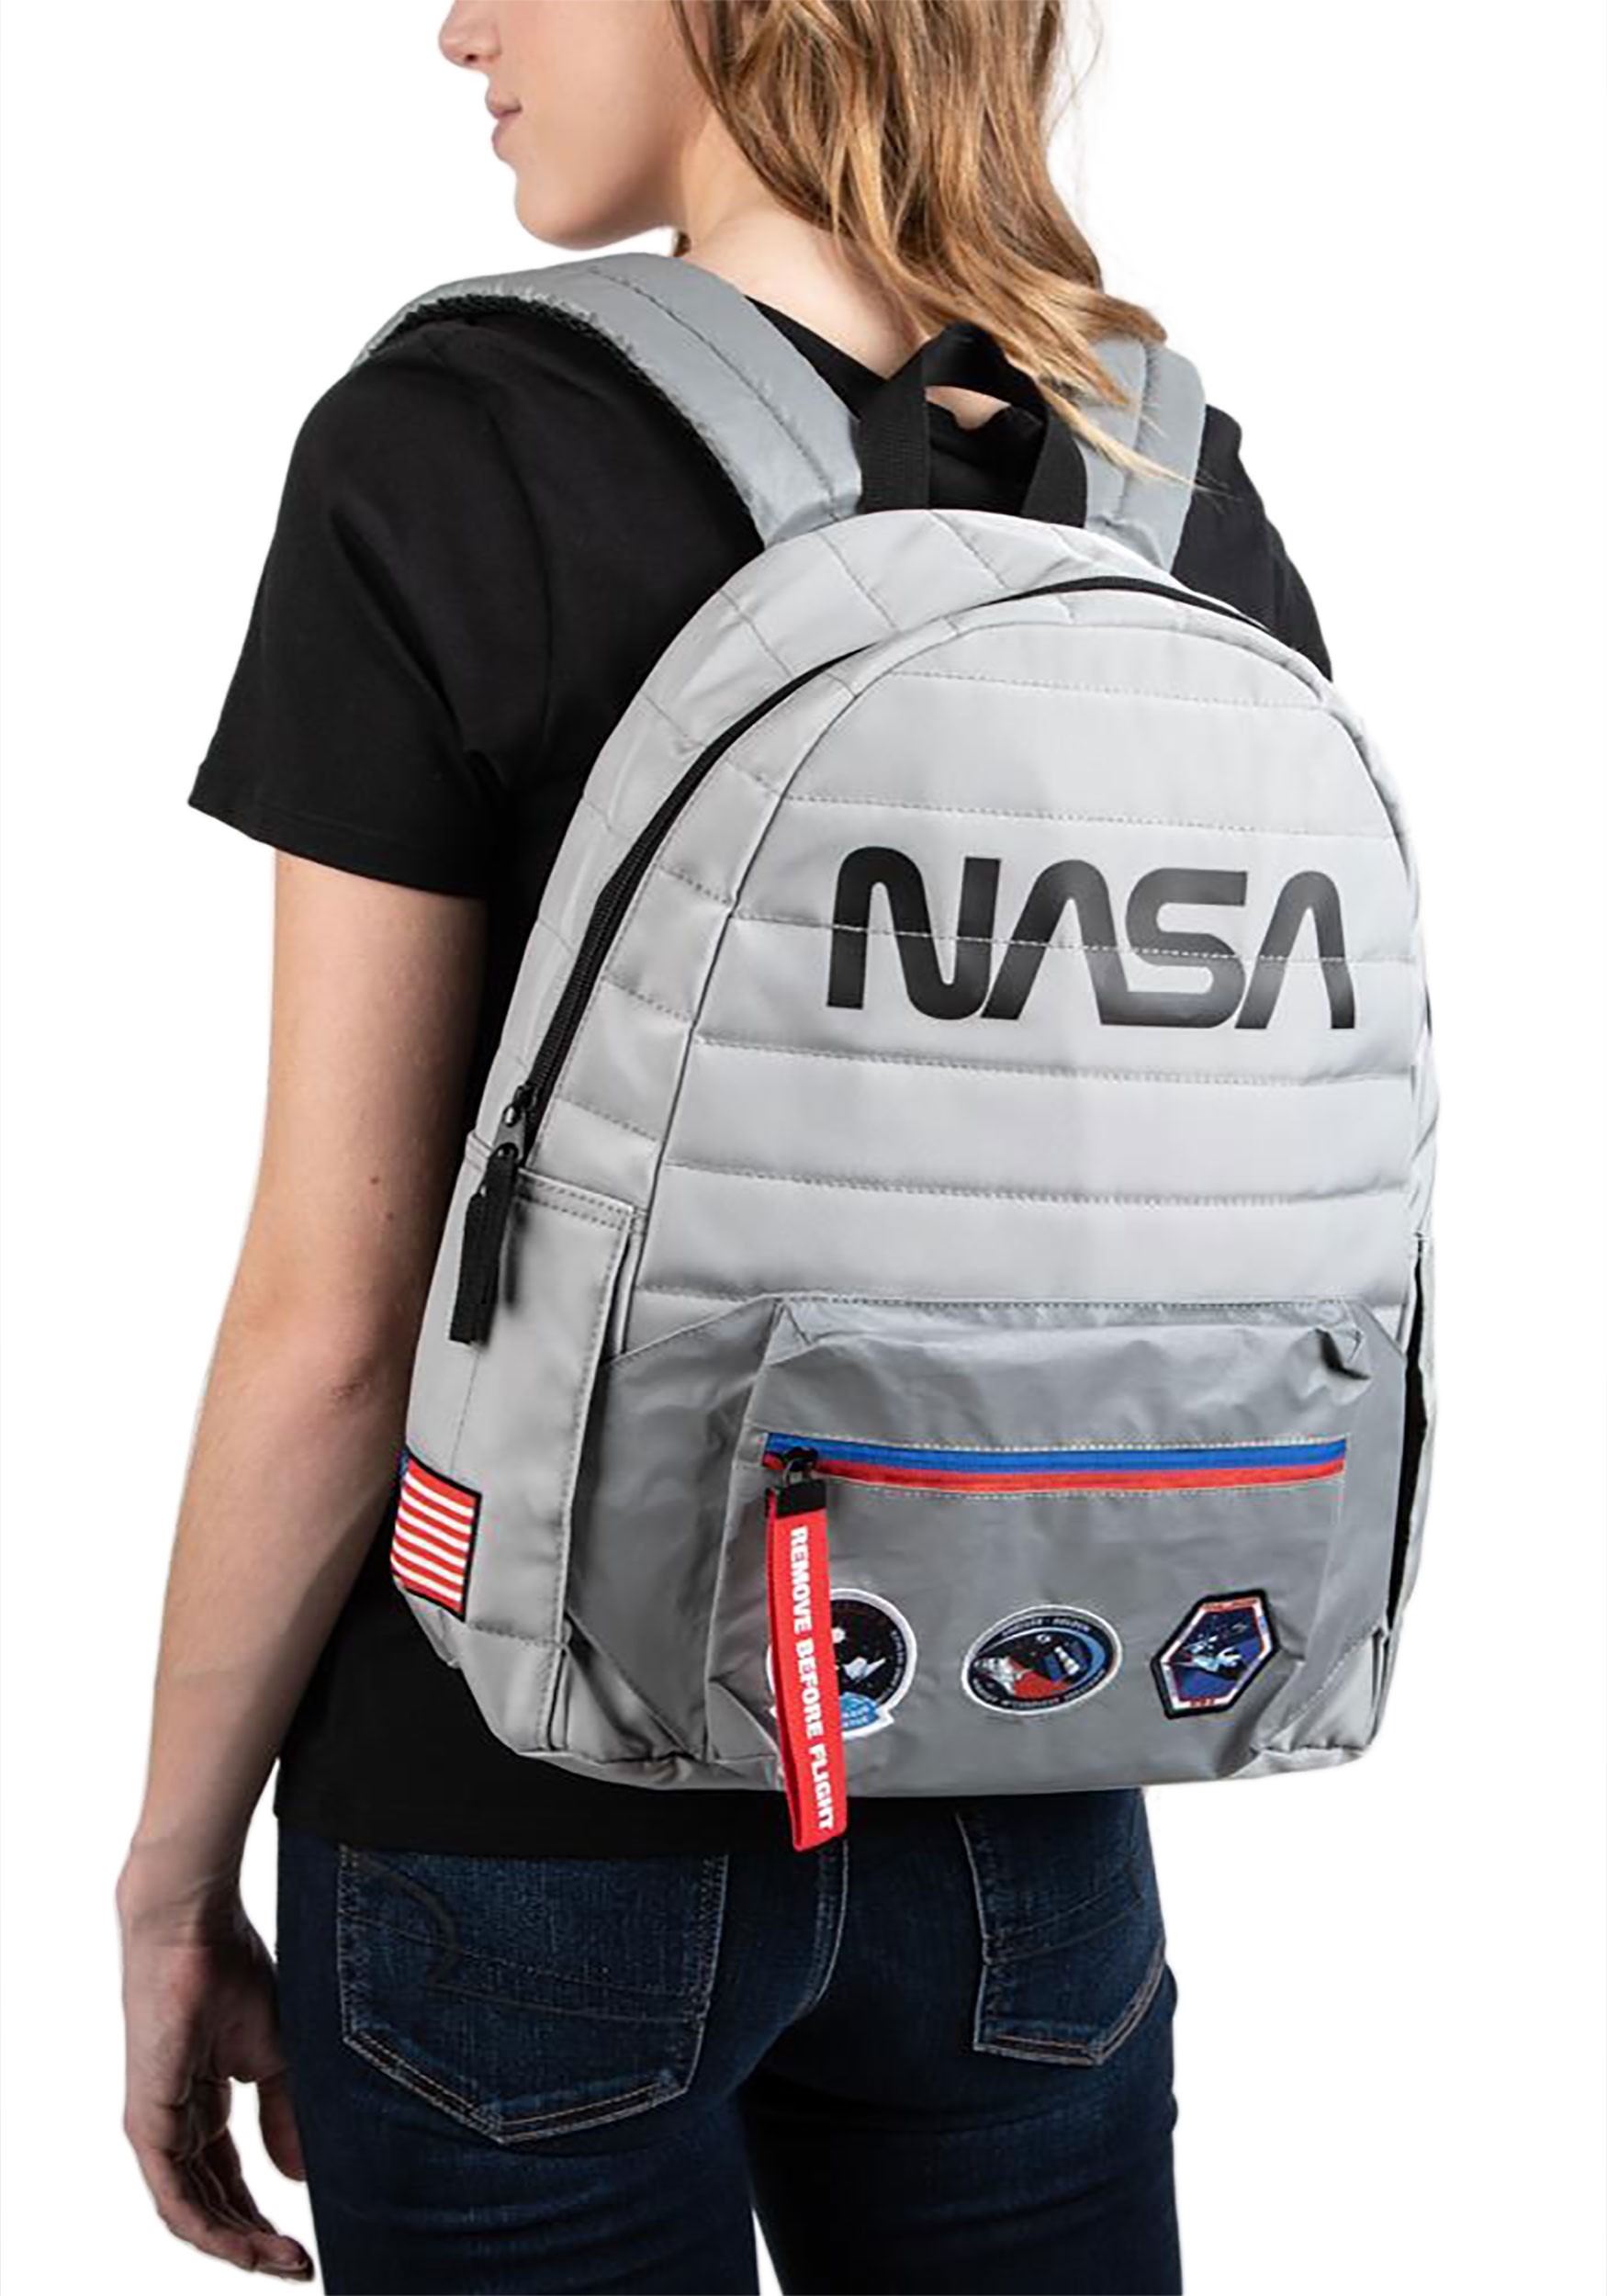 NASA Reflective Fanny Pack Backpack w/ Patches